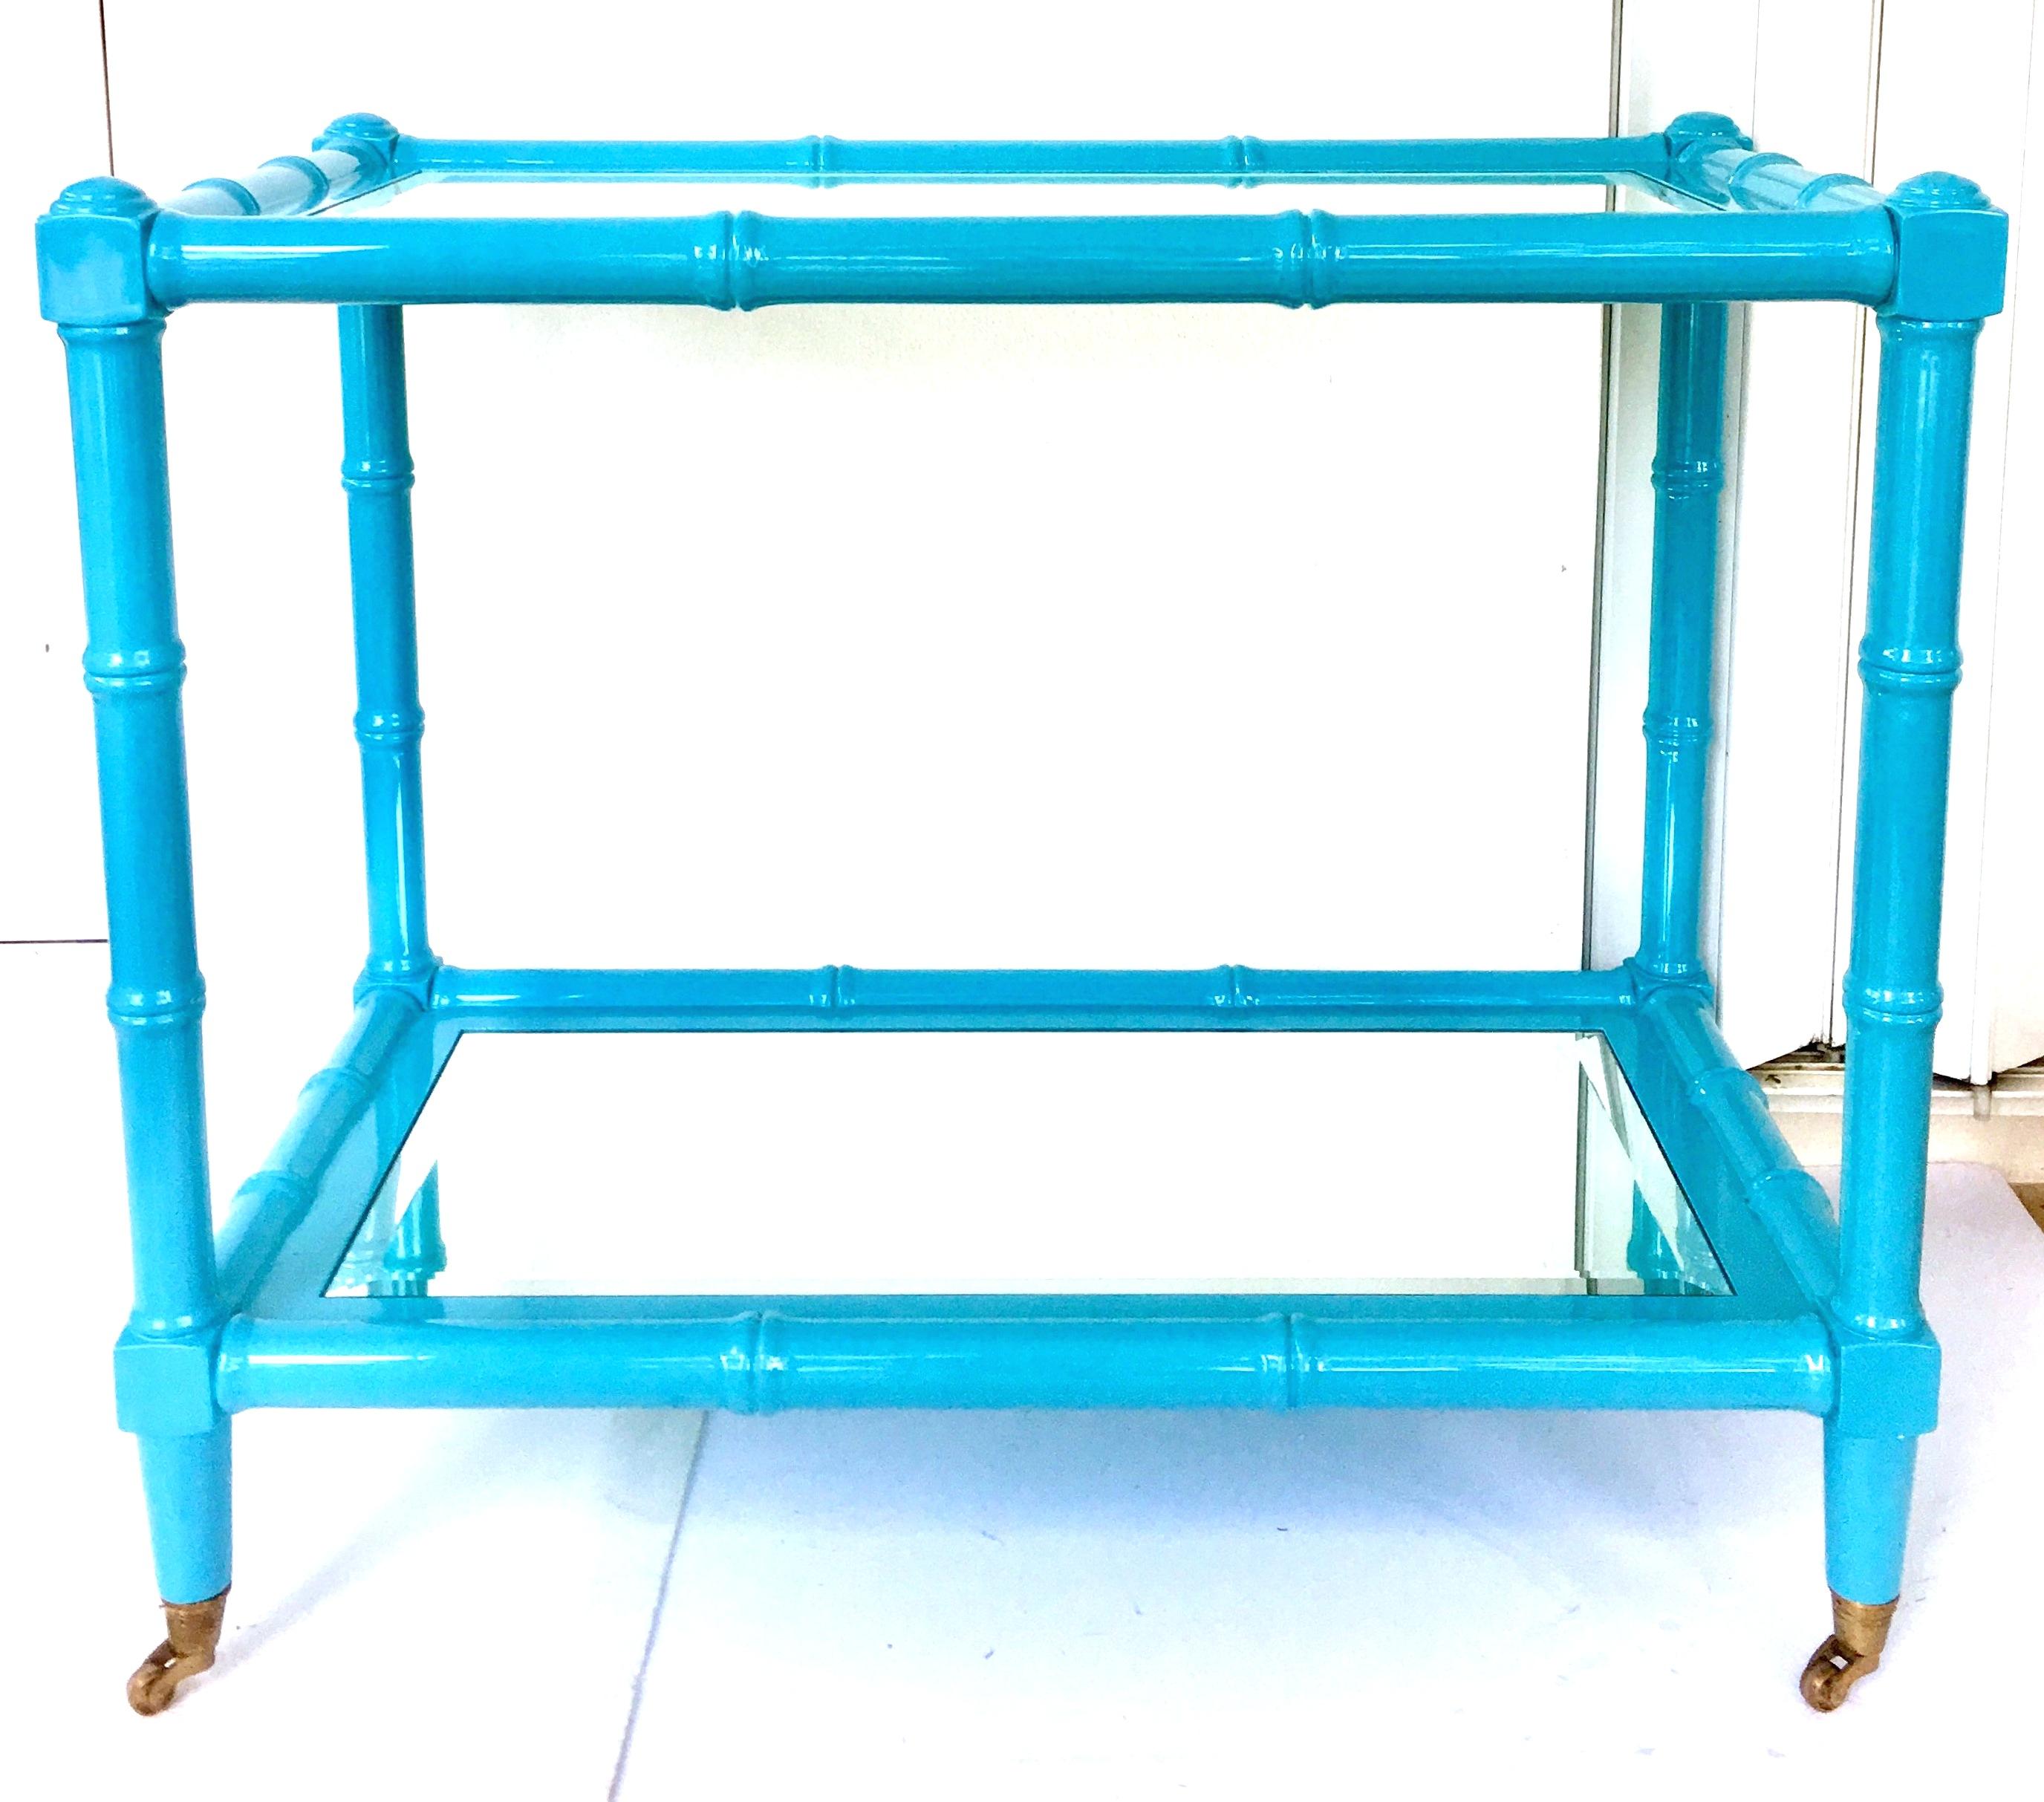 21st century lacquered wood faux bamboo and glass rolling bar cart. Features two beveled edge mirror tops, solid brass caster wheels and a high gloss vibrant turquoise lacquer finish.
Measures: Bottom shelf to top shelf distance, 22